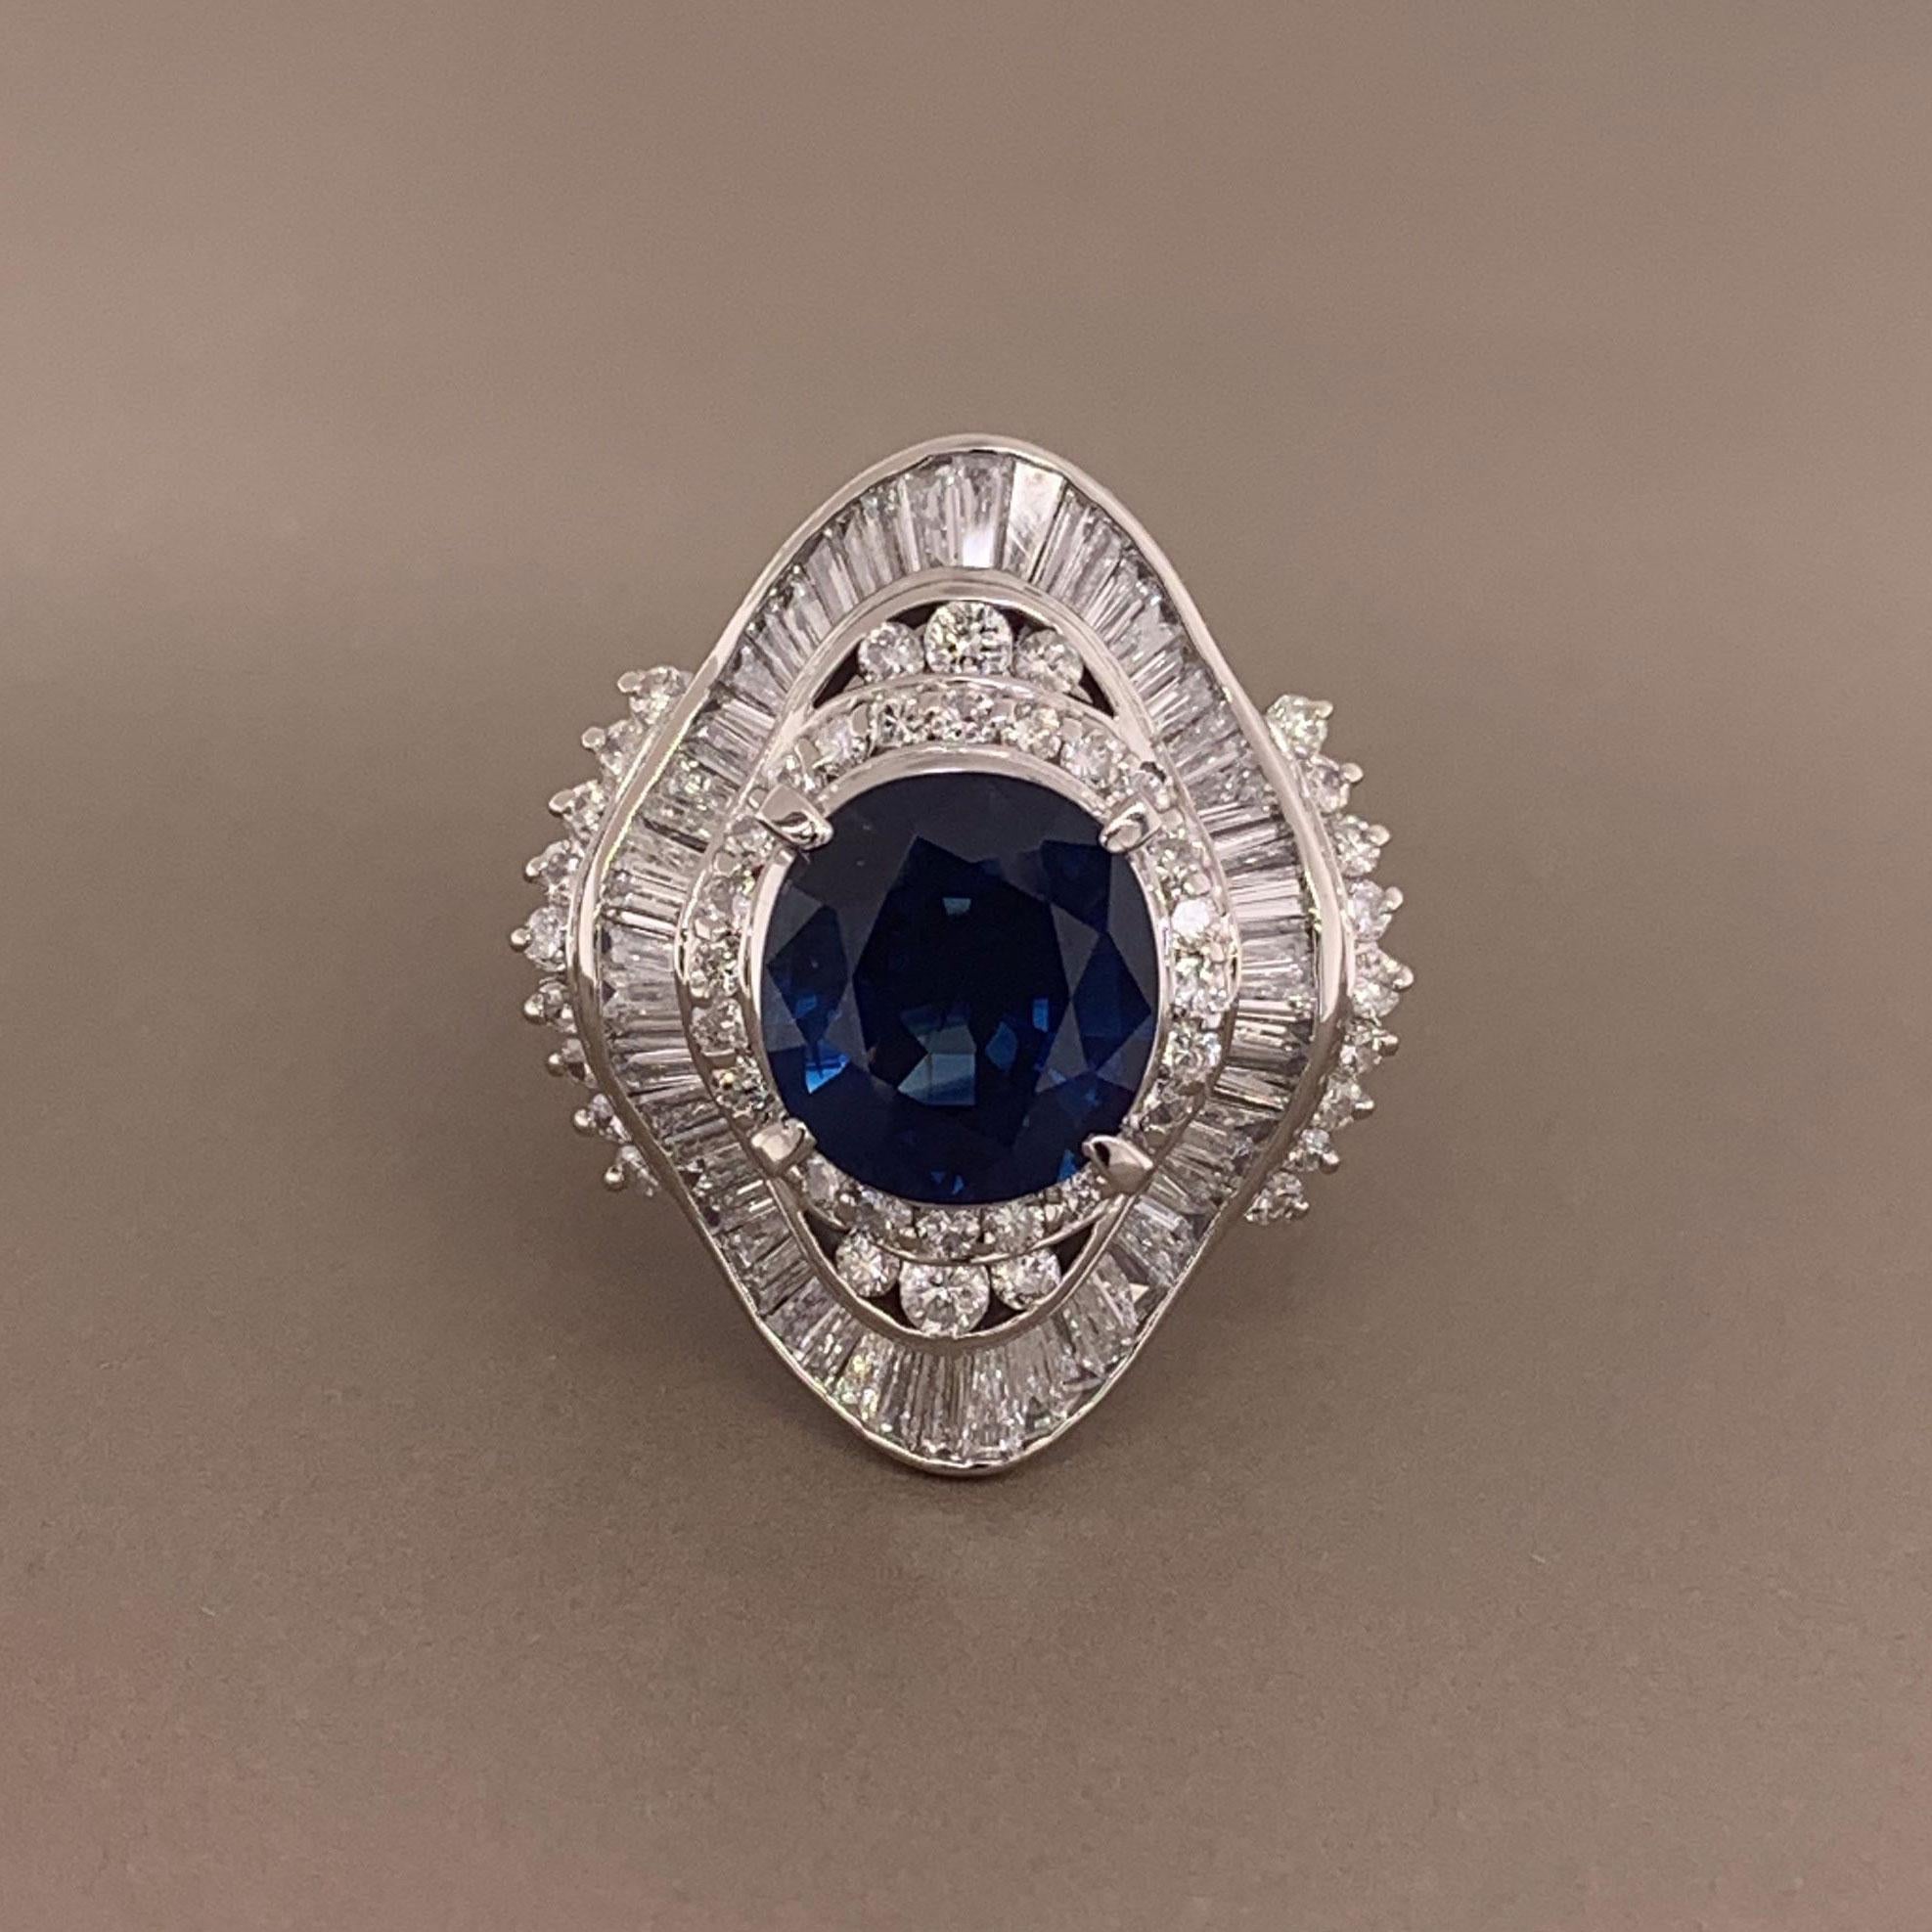 A ring hand fabricated in platinum. This special piece features a 3.71 carat oval shaped blue sapphire. It has a delicate blue color which is free from any inclusions. It is surrounded by1.55 carats of round and baguette cut diamonds which are set